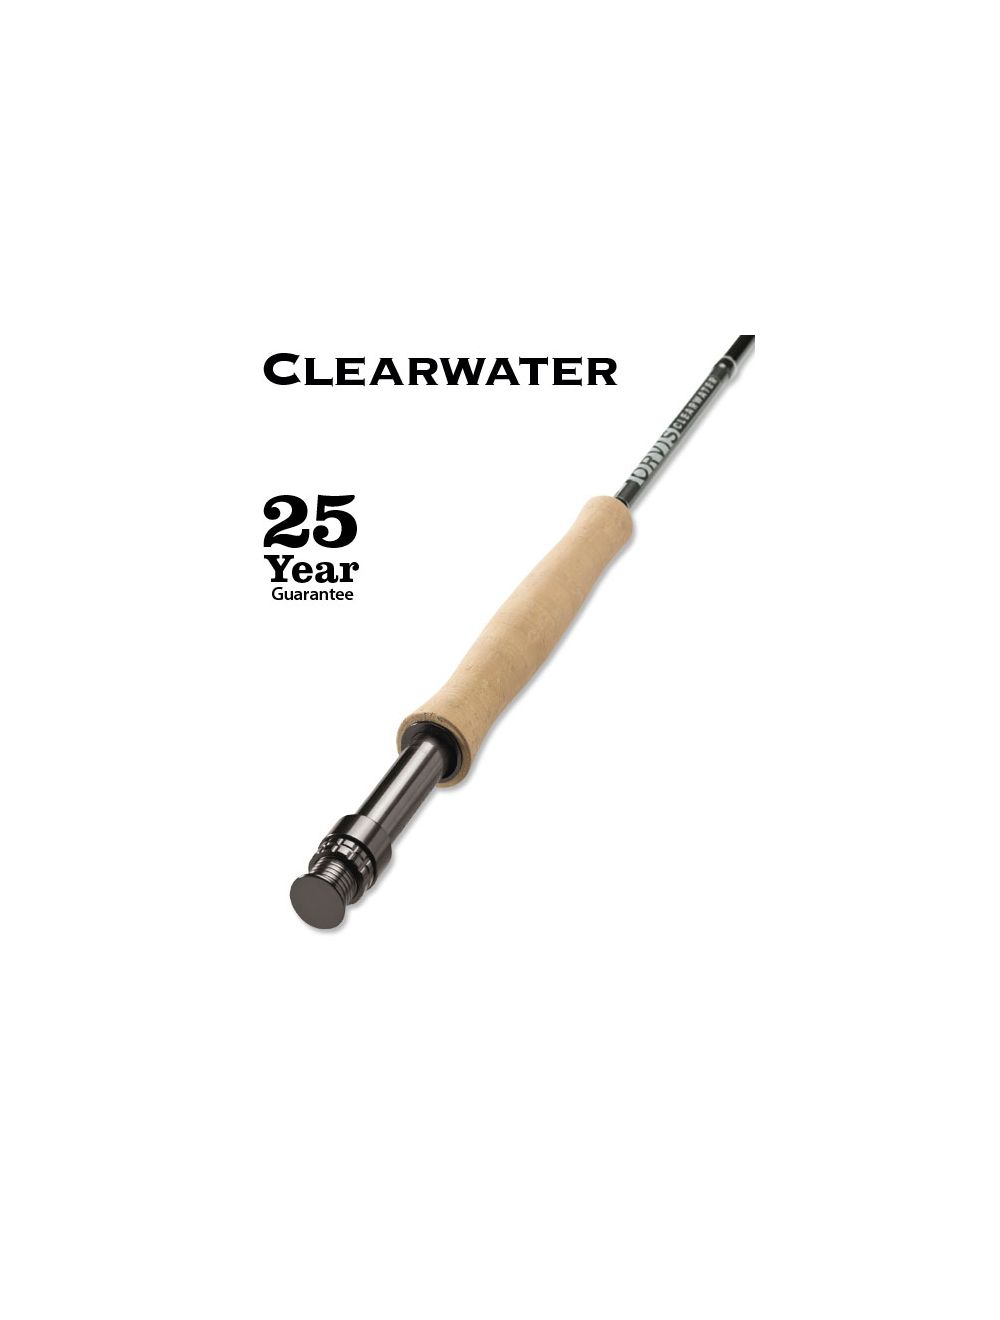 Orvis Clearwater Rod - Freshwater TheFlyStop